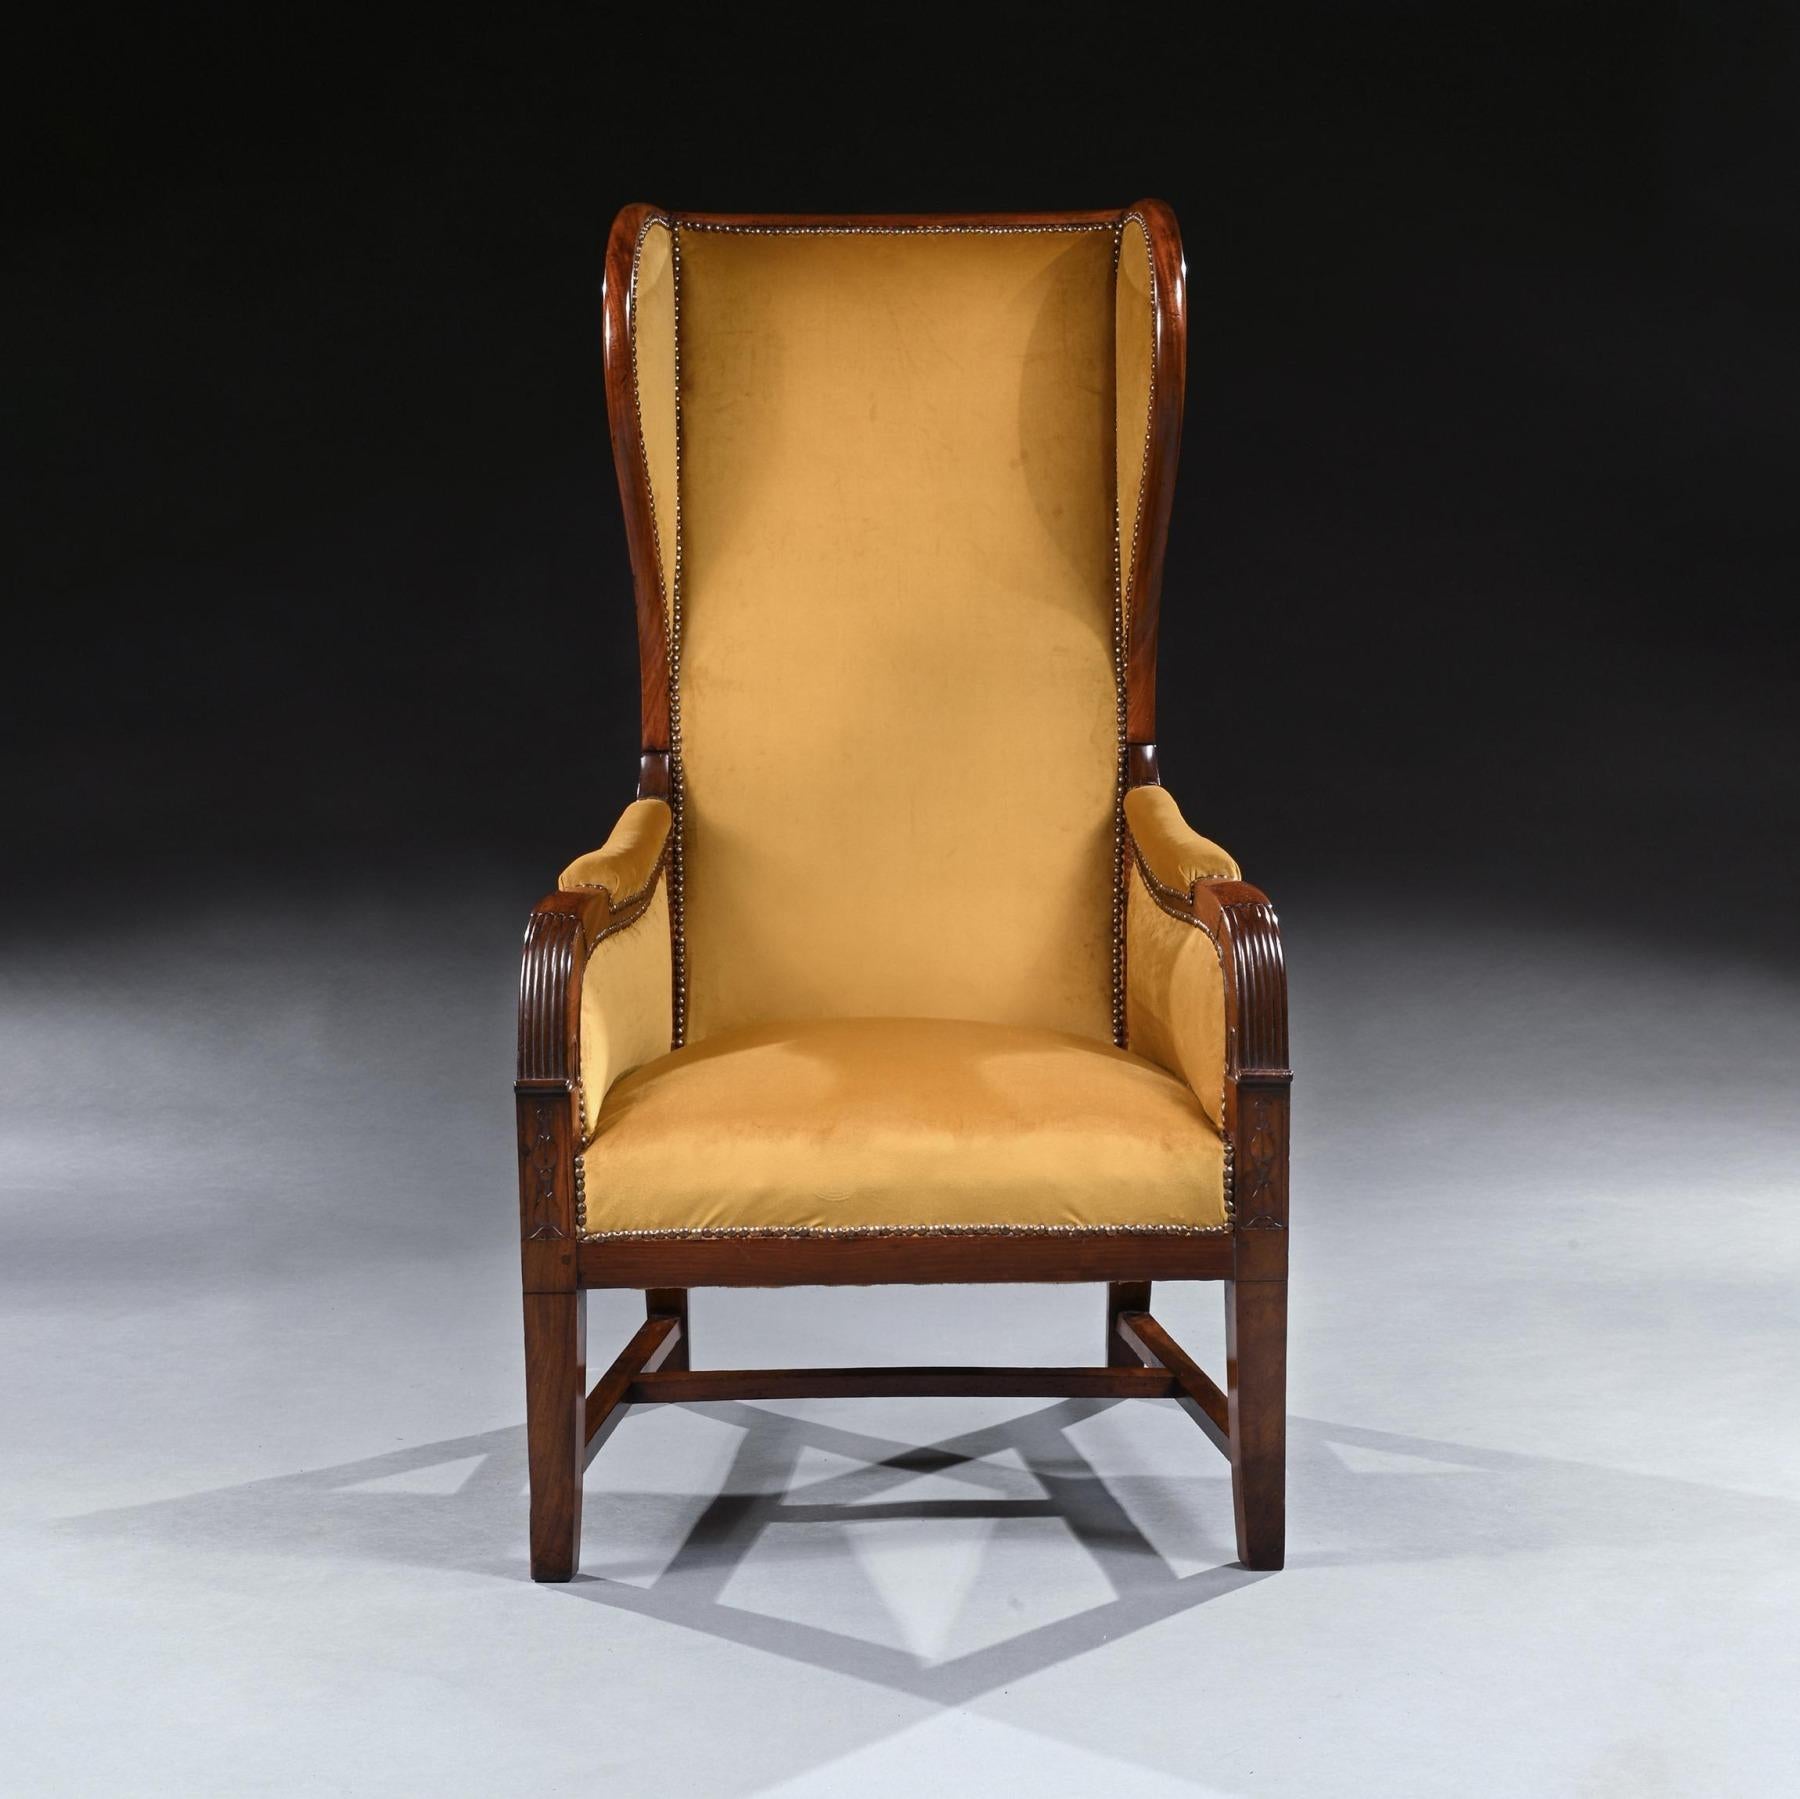 An unusual French Empire mahogany reclining wing back armchair of high proportions.

French, Circa 1820.

Of elegant proportions, having an unusually high reclining winged mahogany back. The stuff-over seat between padded armrest with reeding